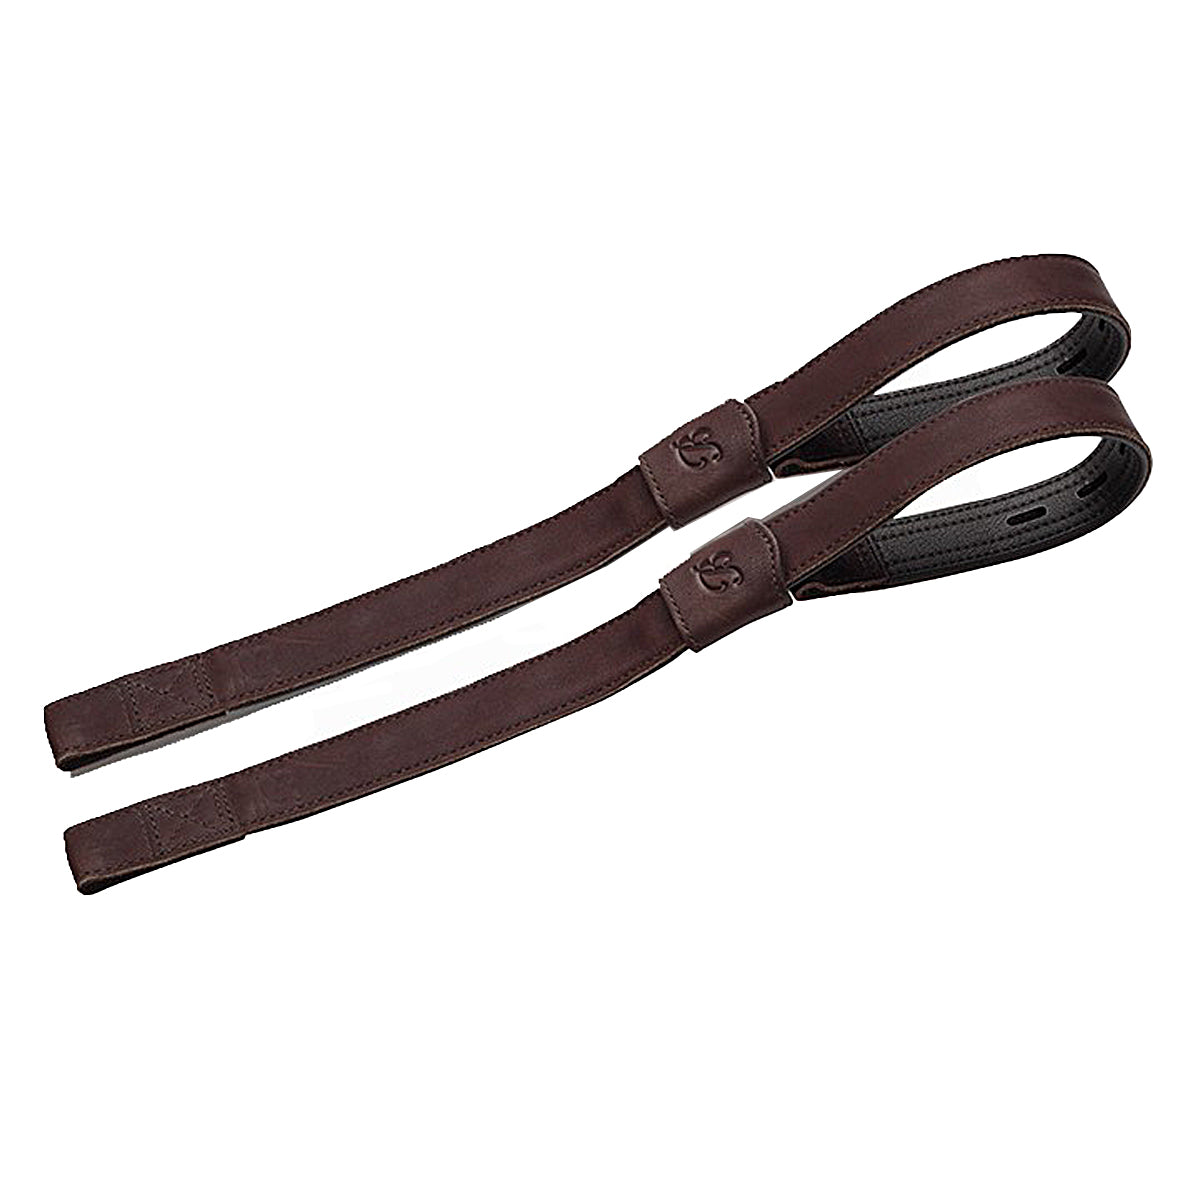 Bates Stirrup Leathers in Heritage Leather | Farm House Tack